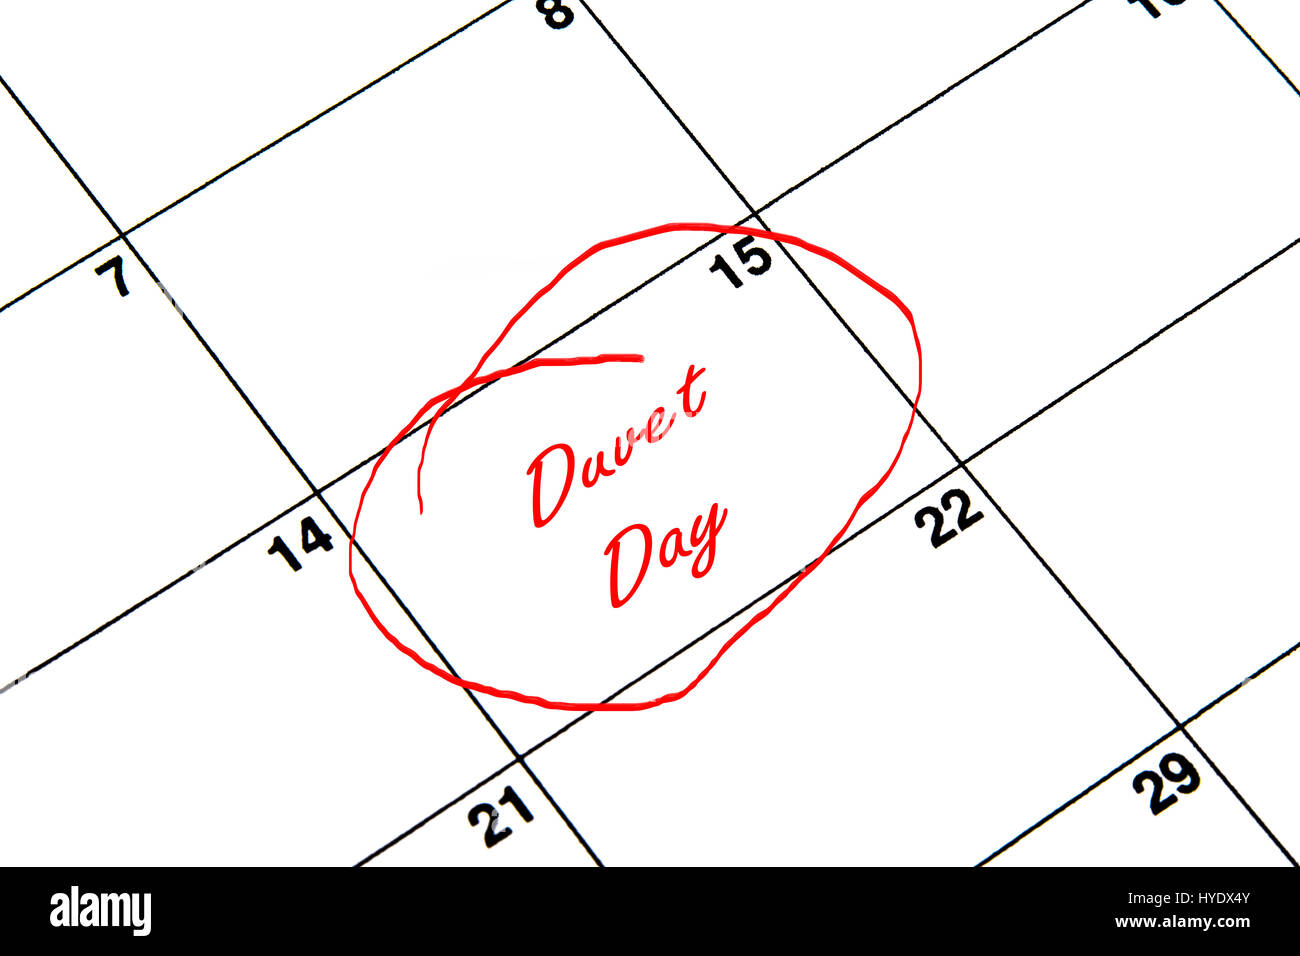 Duvet Day Circled on A Calendar in Red Stock Photo